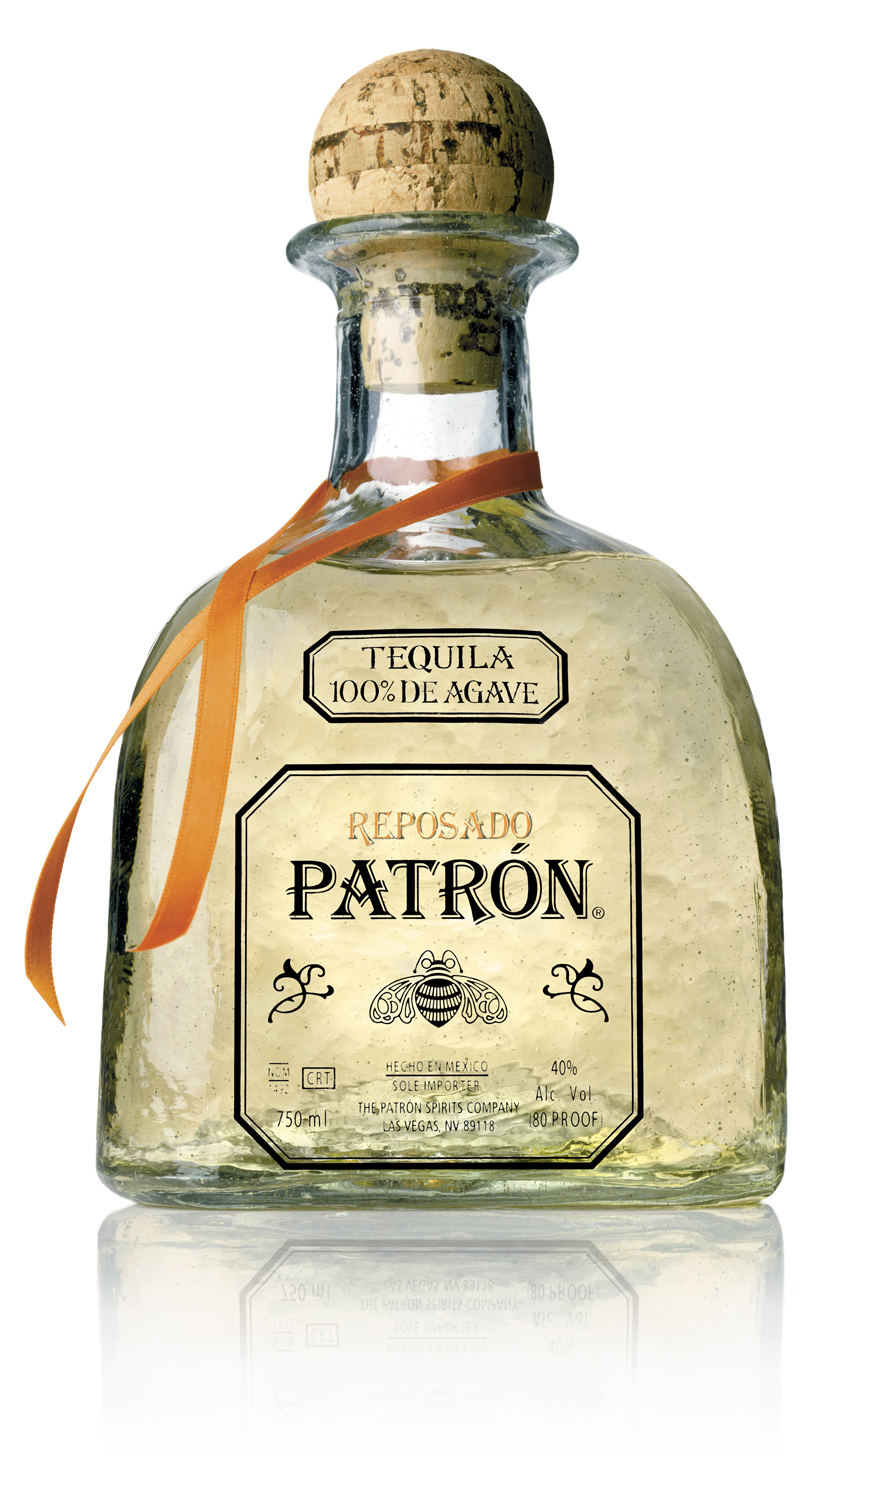 PATRON REPOSADO TEQUILA .750 for only $40.99 in online liquor store.